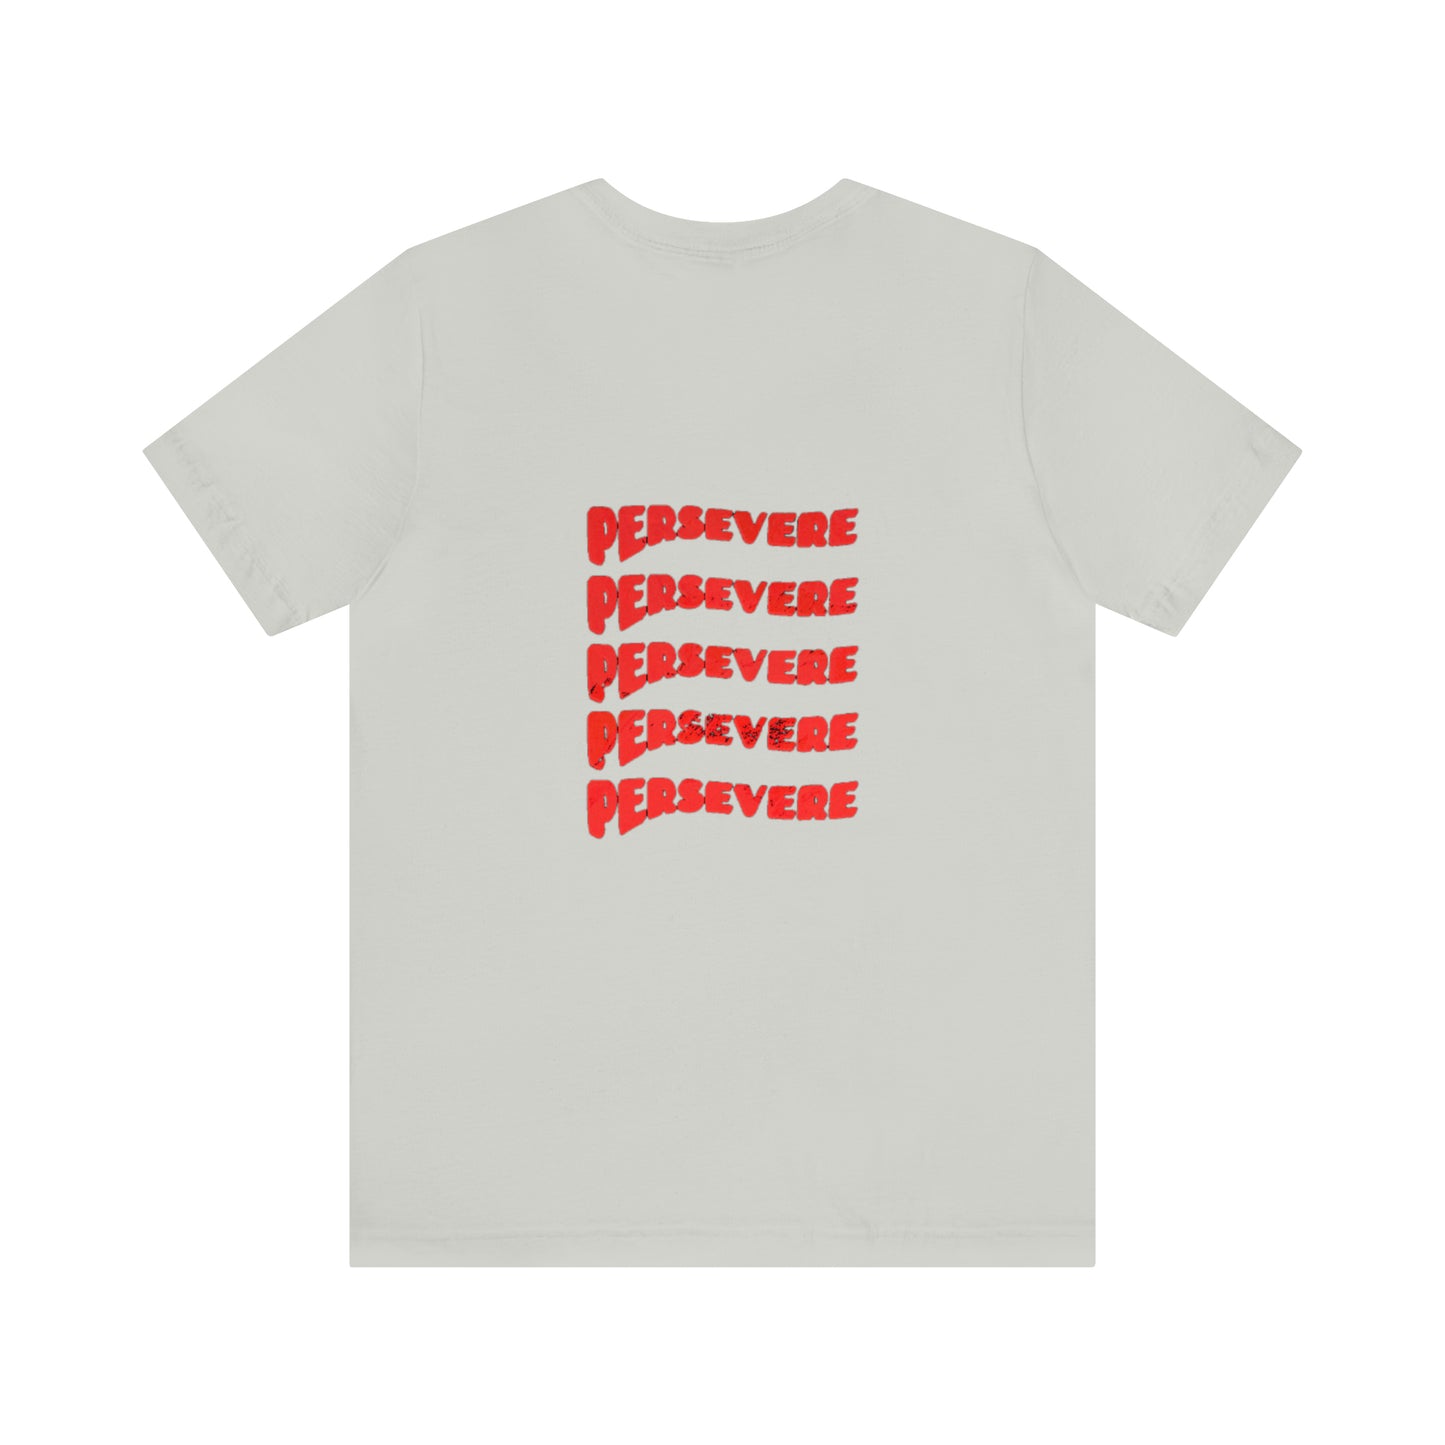 "Persevere" T-Shirt